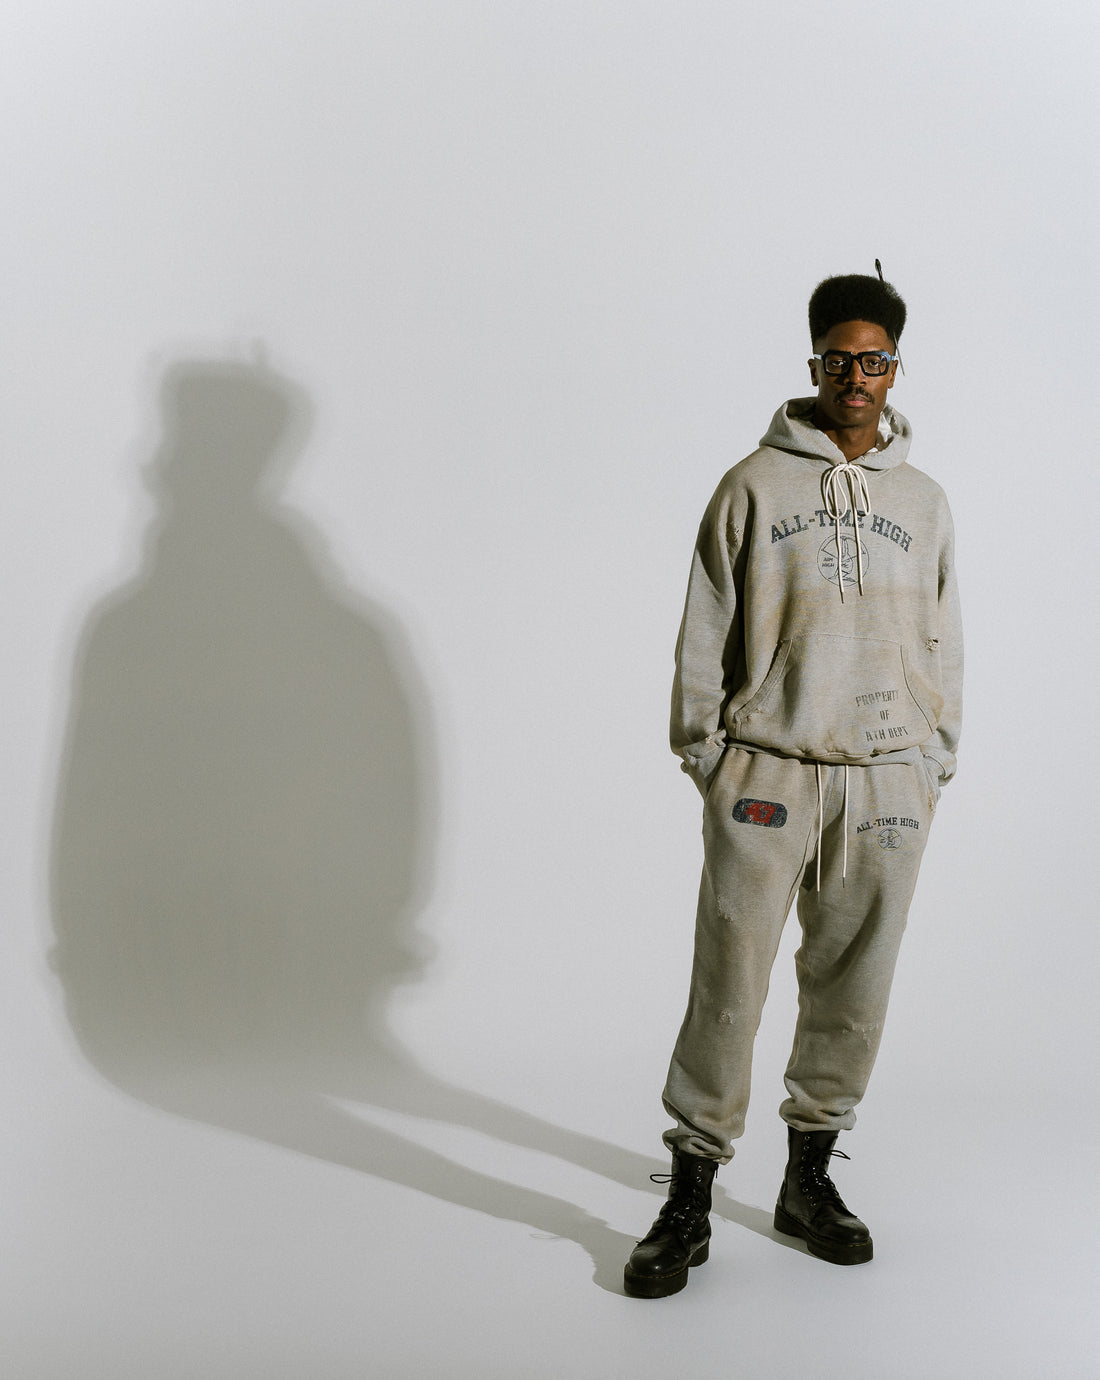  Mark wearing all time high cotton fleece heather grey graphic sweatpants and hoodie standing on white studio backdrop with shadow silhouette